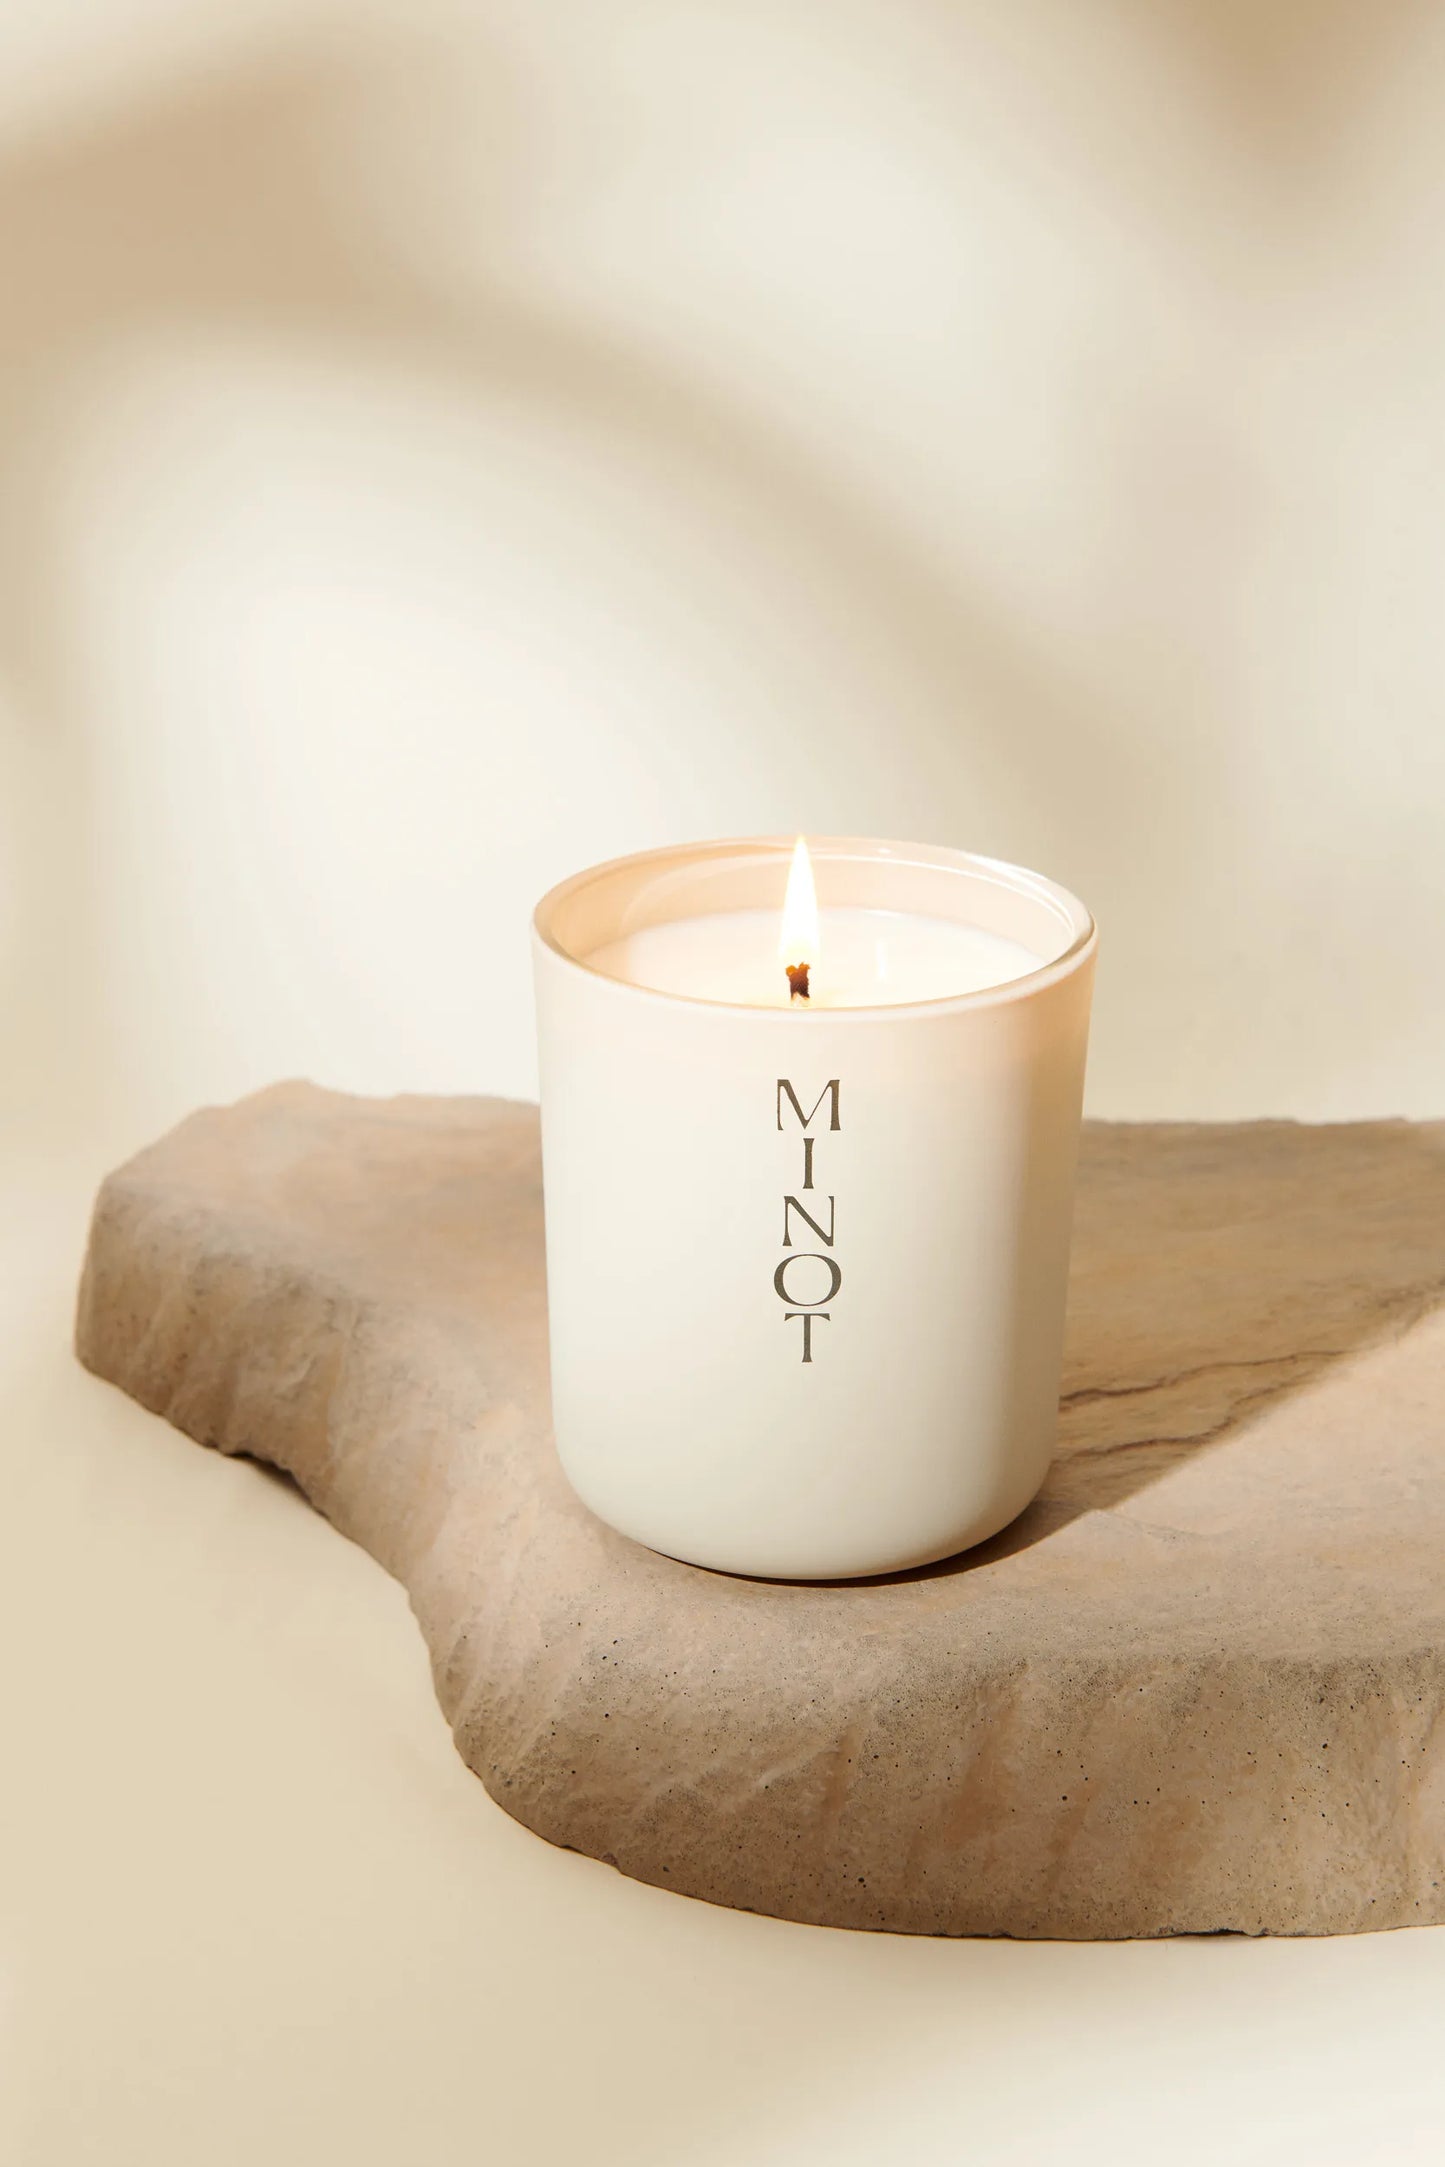 Terrene is an earthy, vegan candle with a blend of agave, green floral, chrysanthemum and aloe notes